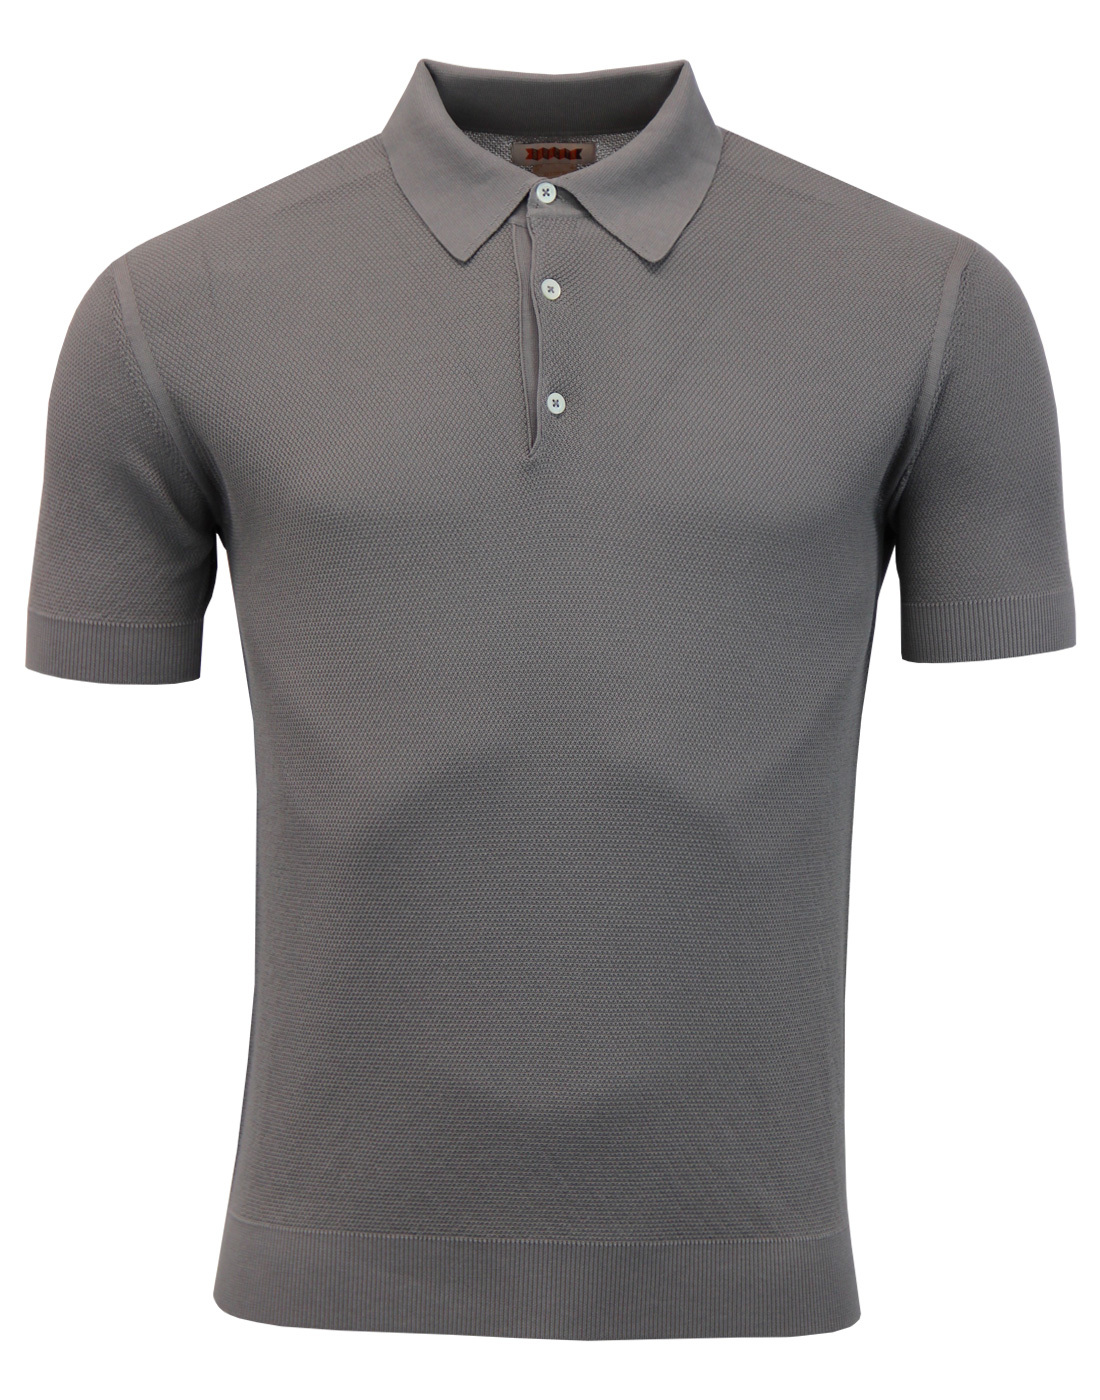 BARACUTA Mens Retro Sixties Knitted Pique Polo in Silver